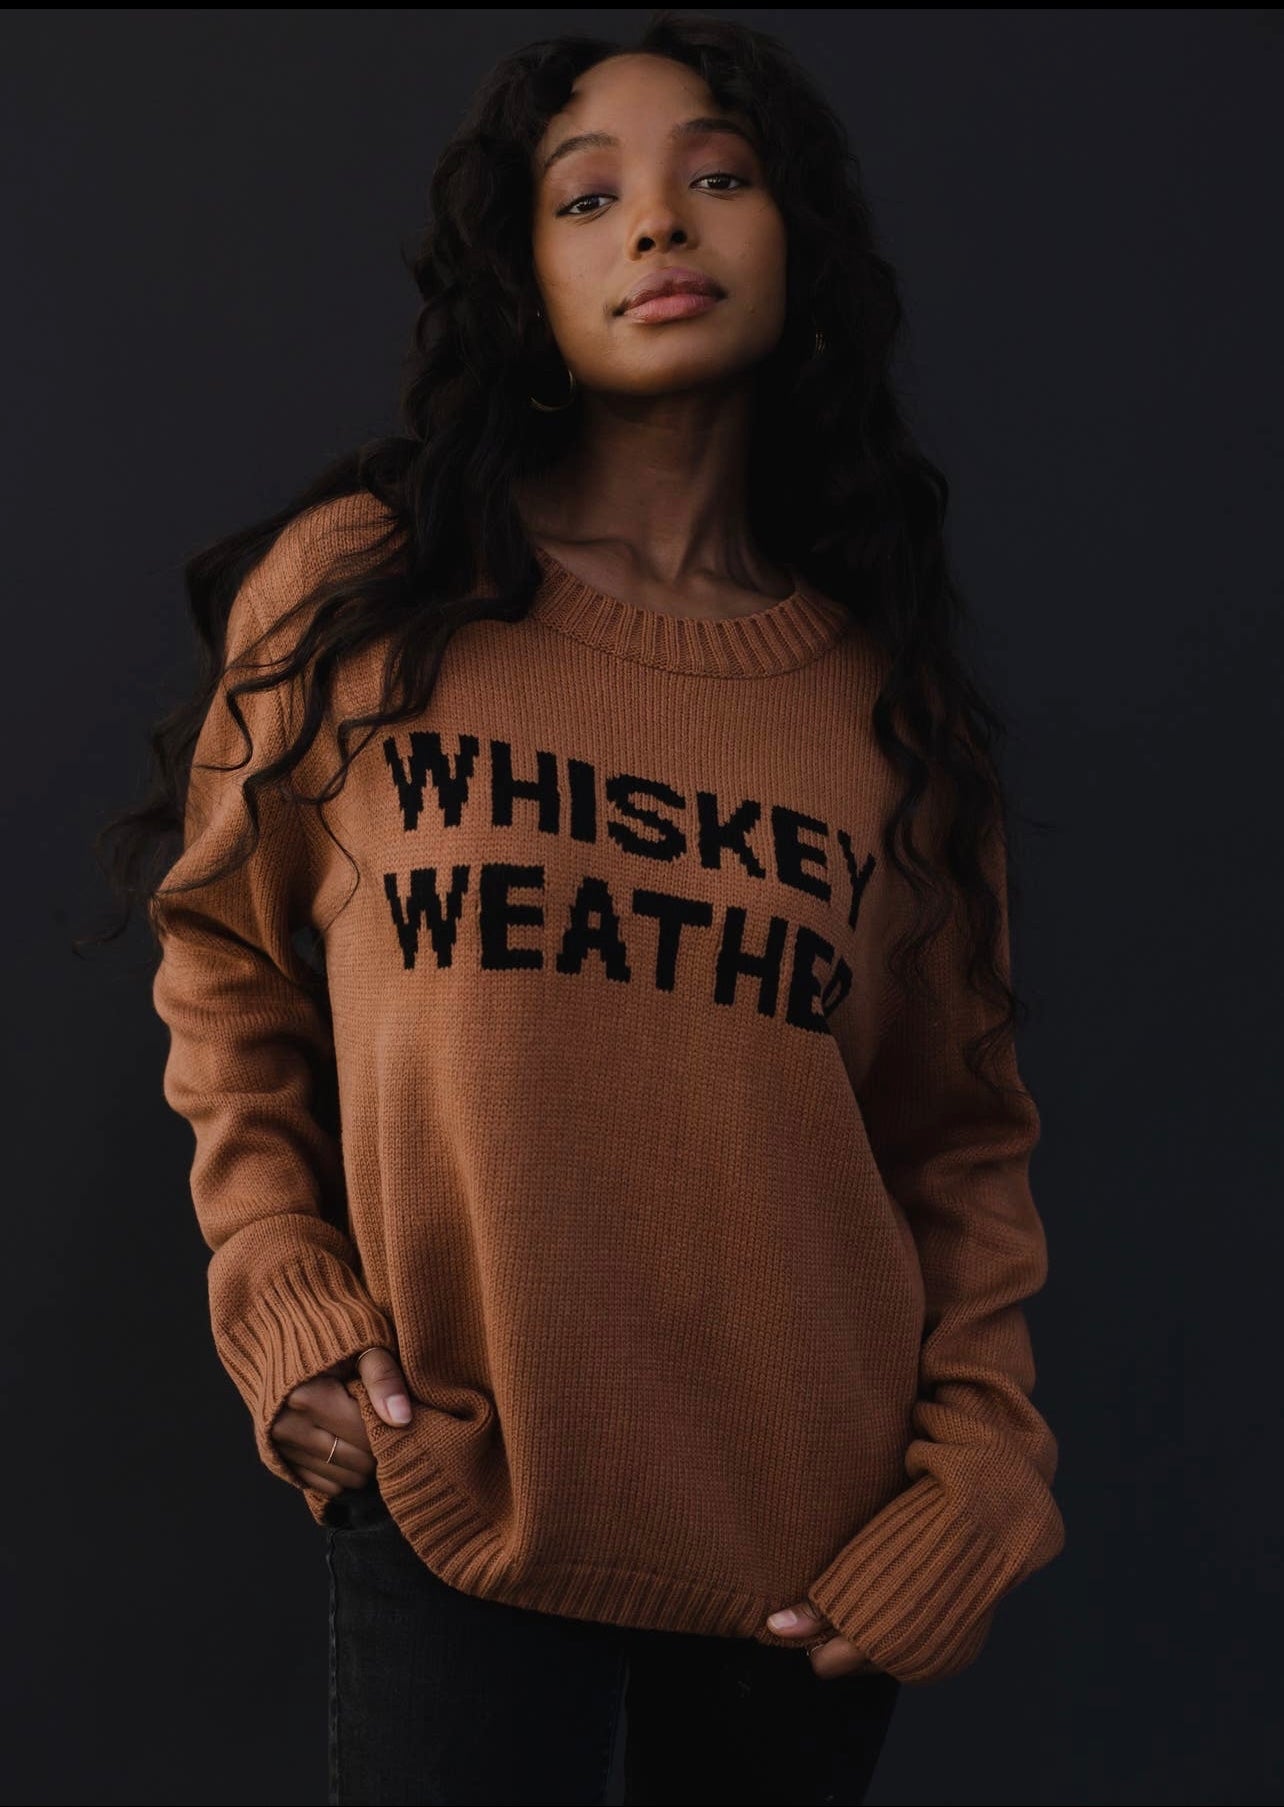 Whiskey Weather Knit Pullover Sweater